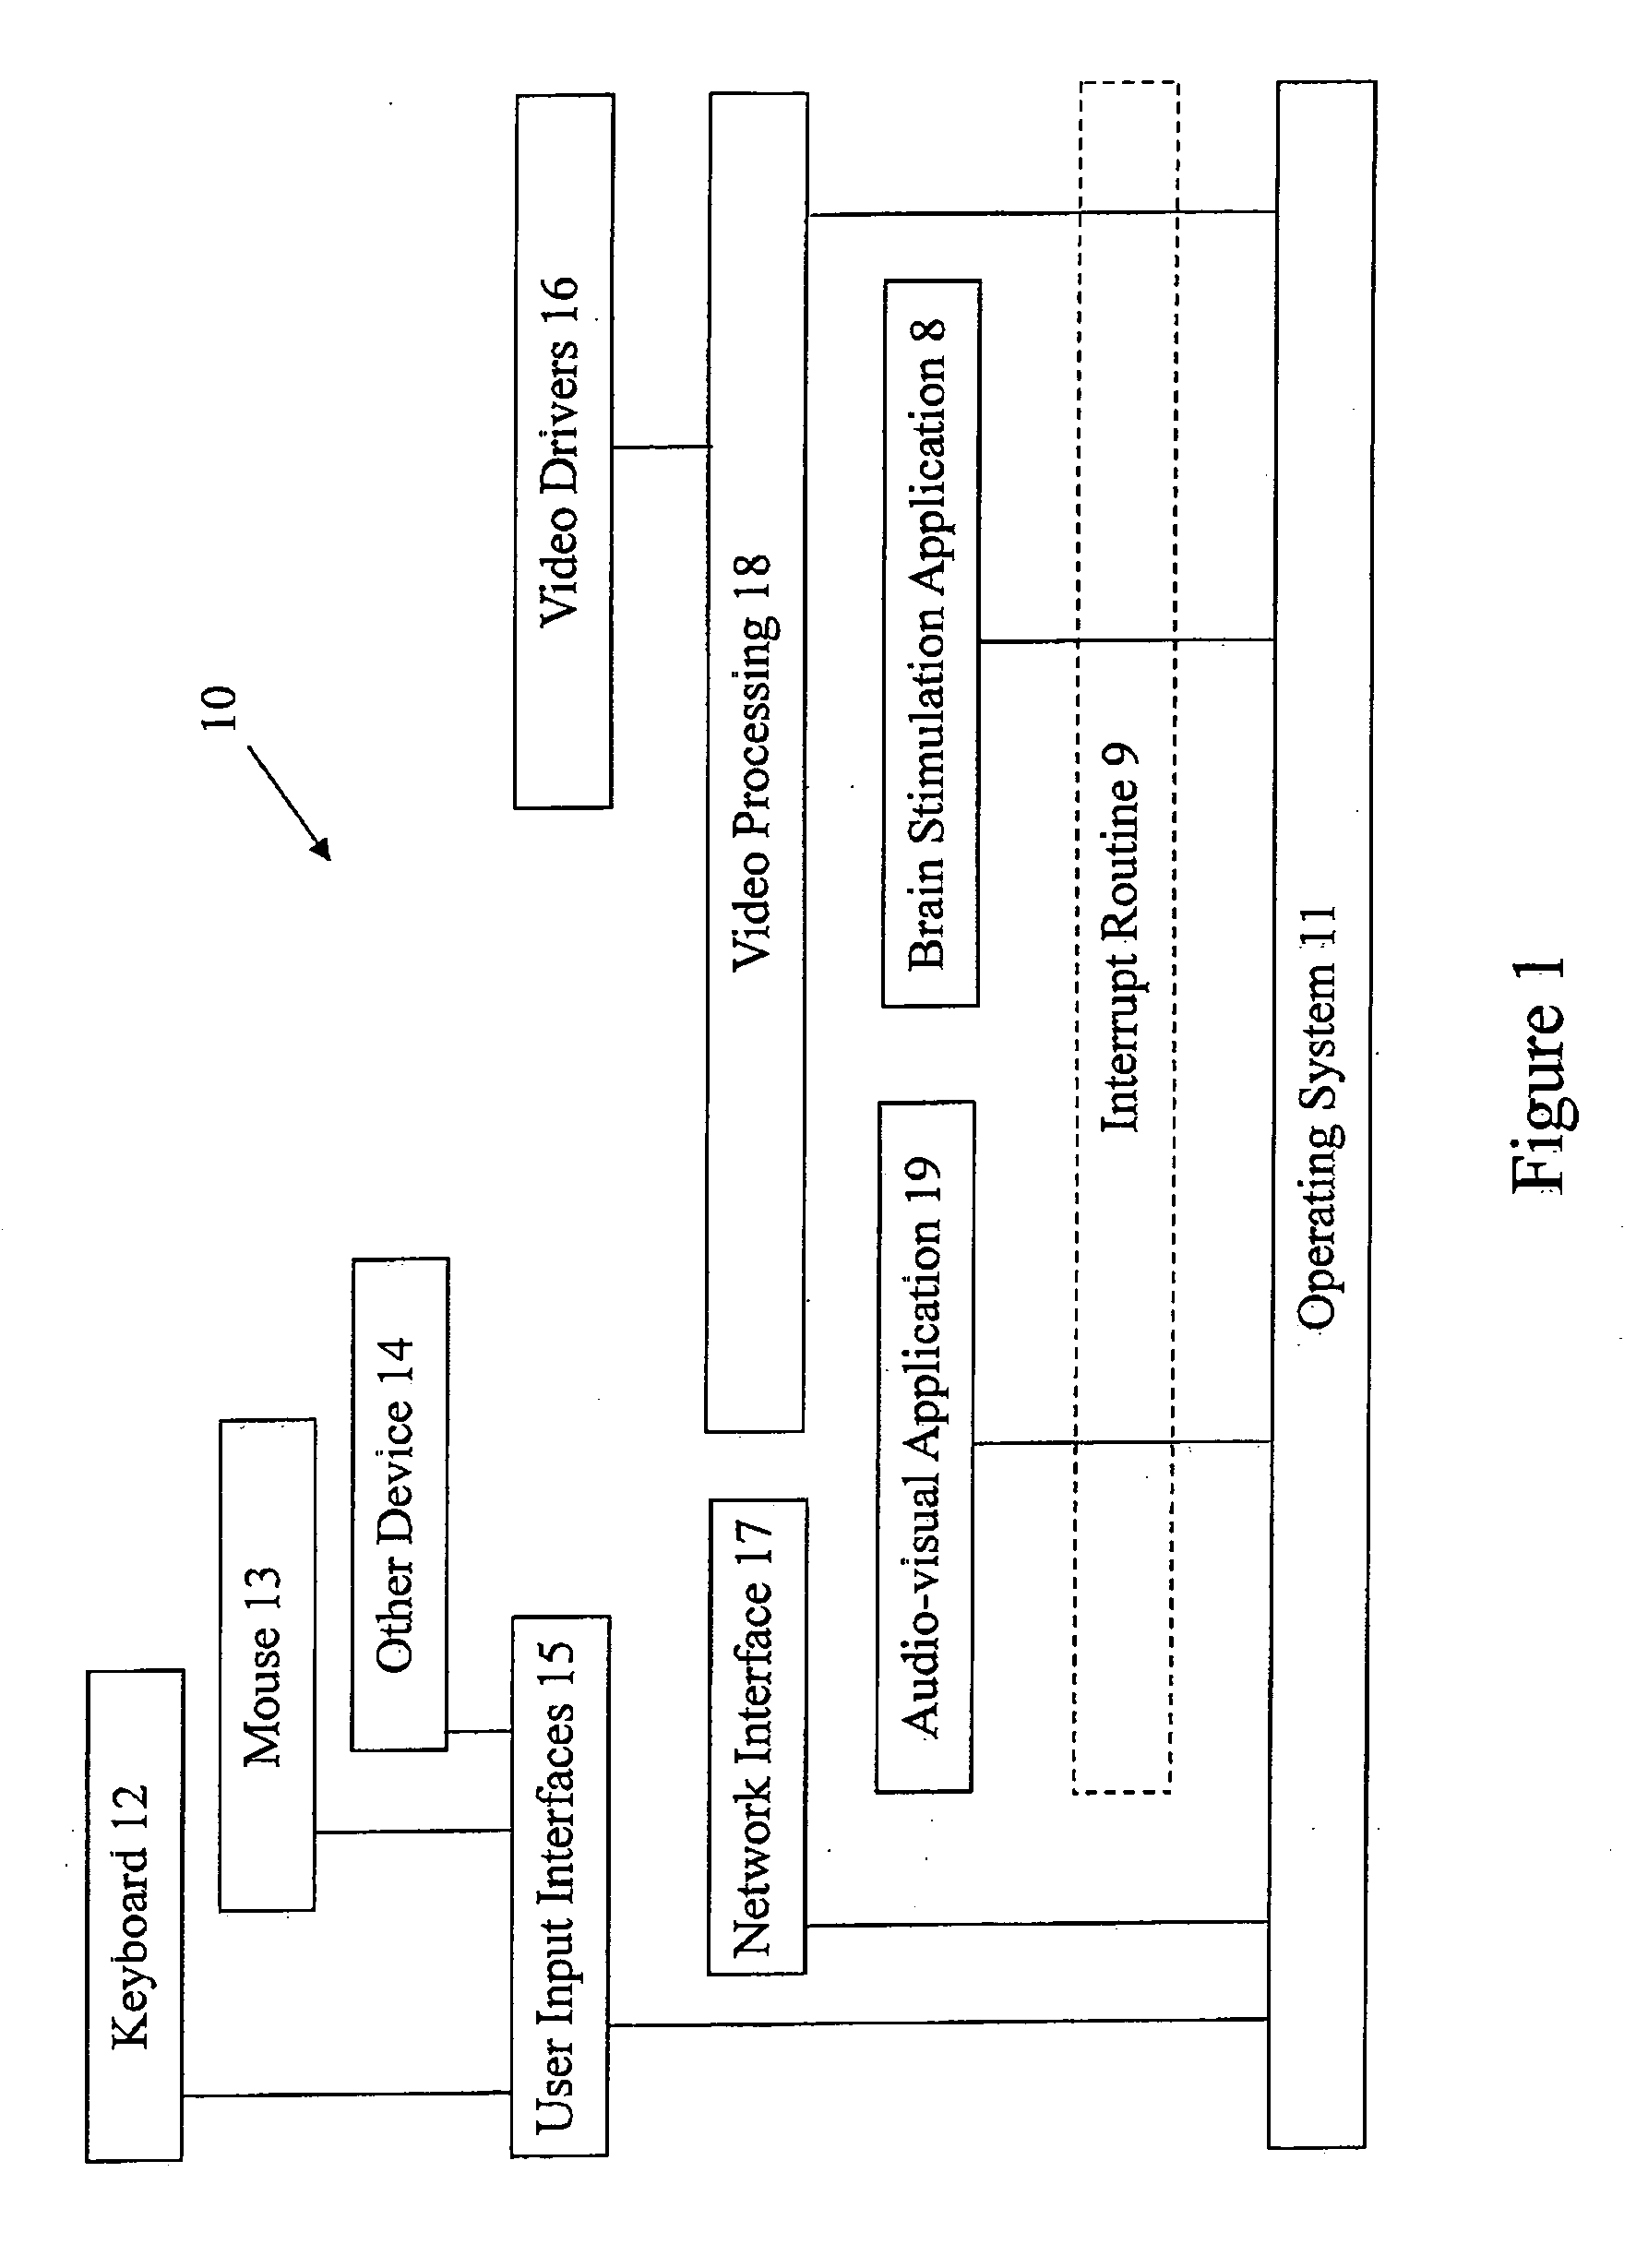 System and method for interjecting bilateral brain activation into routine activity